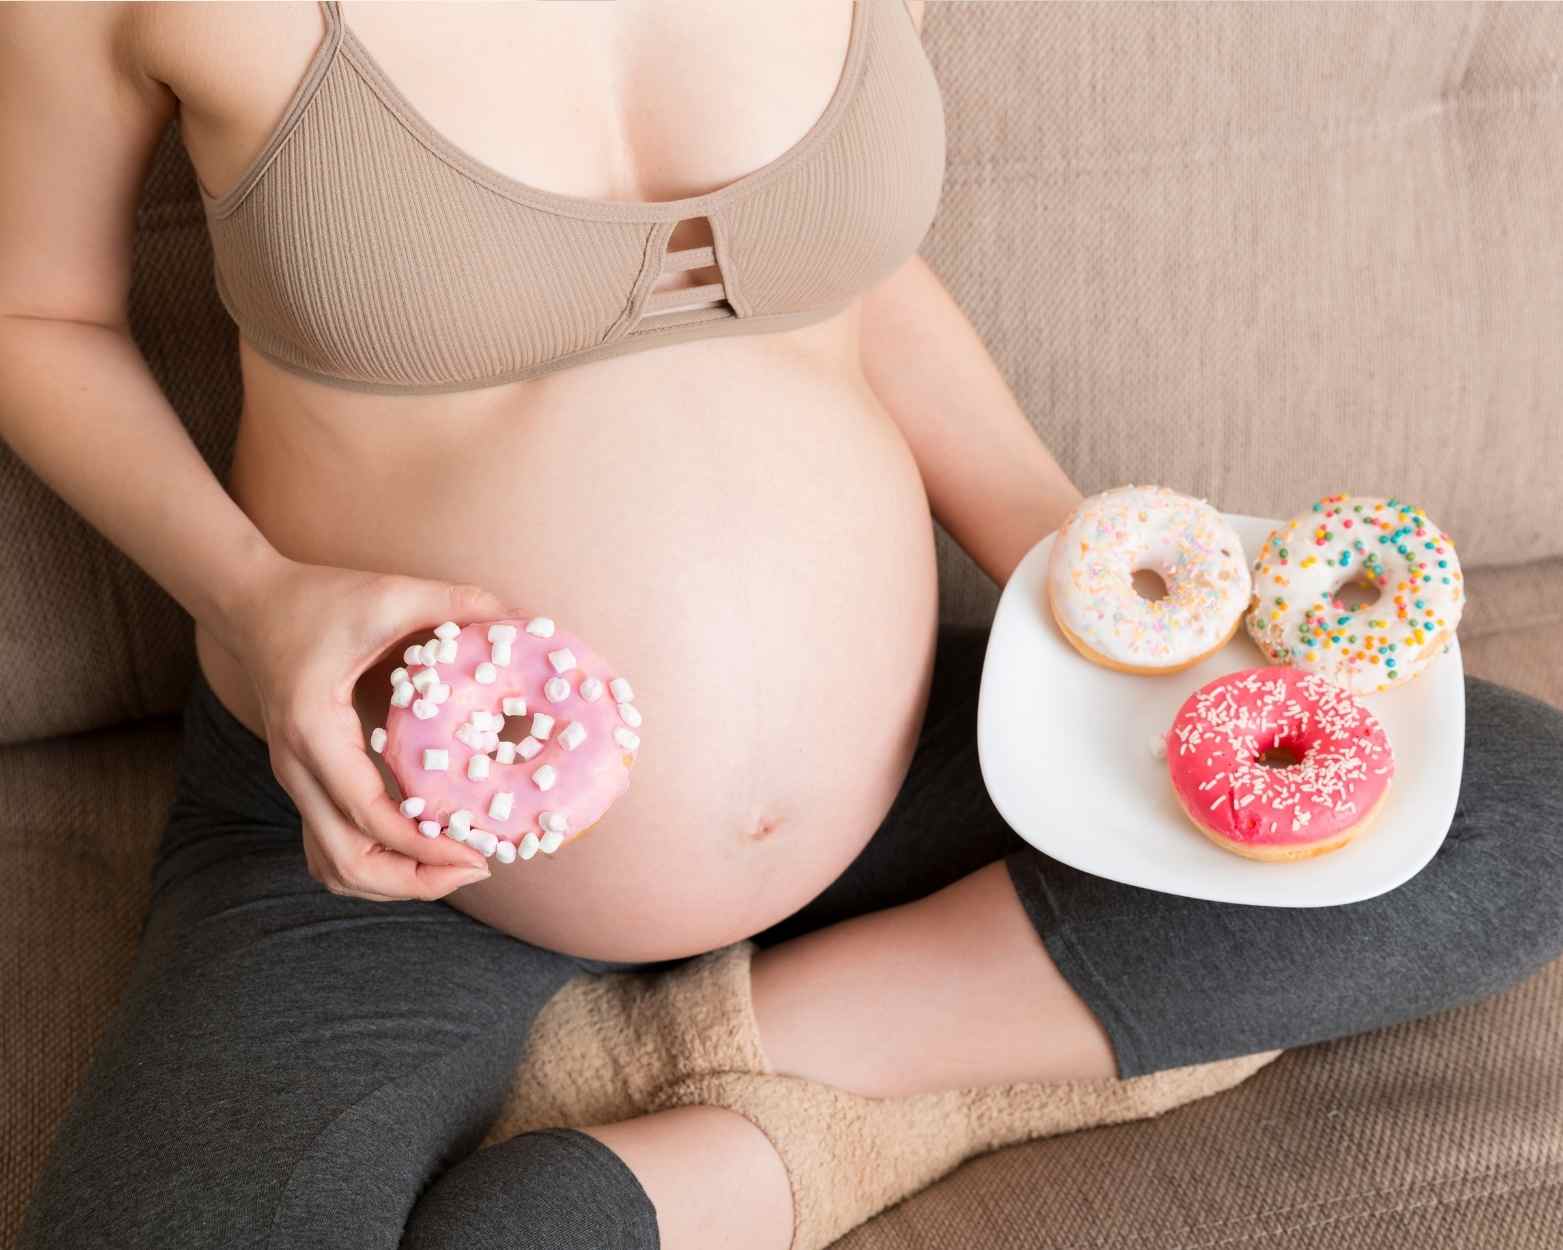 A pregnant woman holding donuts but wanting to have healthy pregnancy snacks instead.